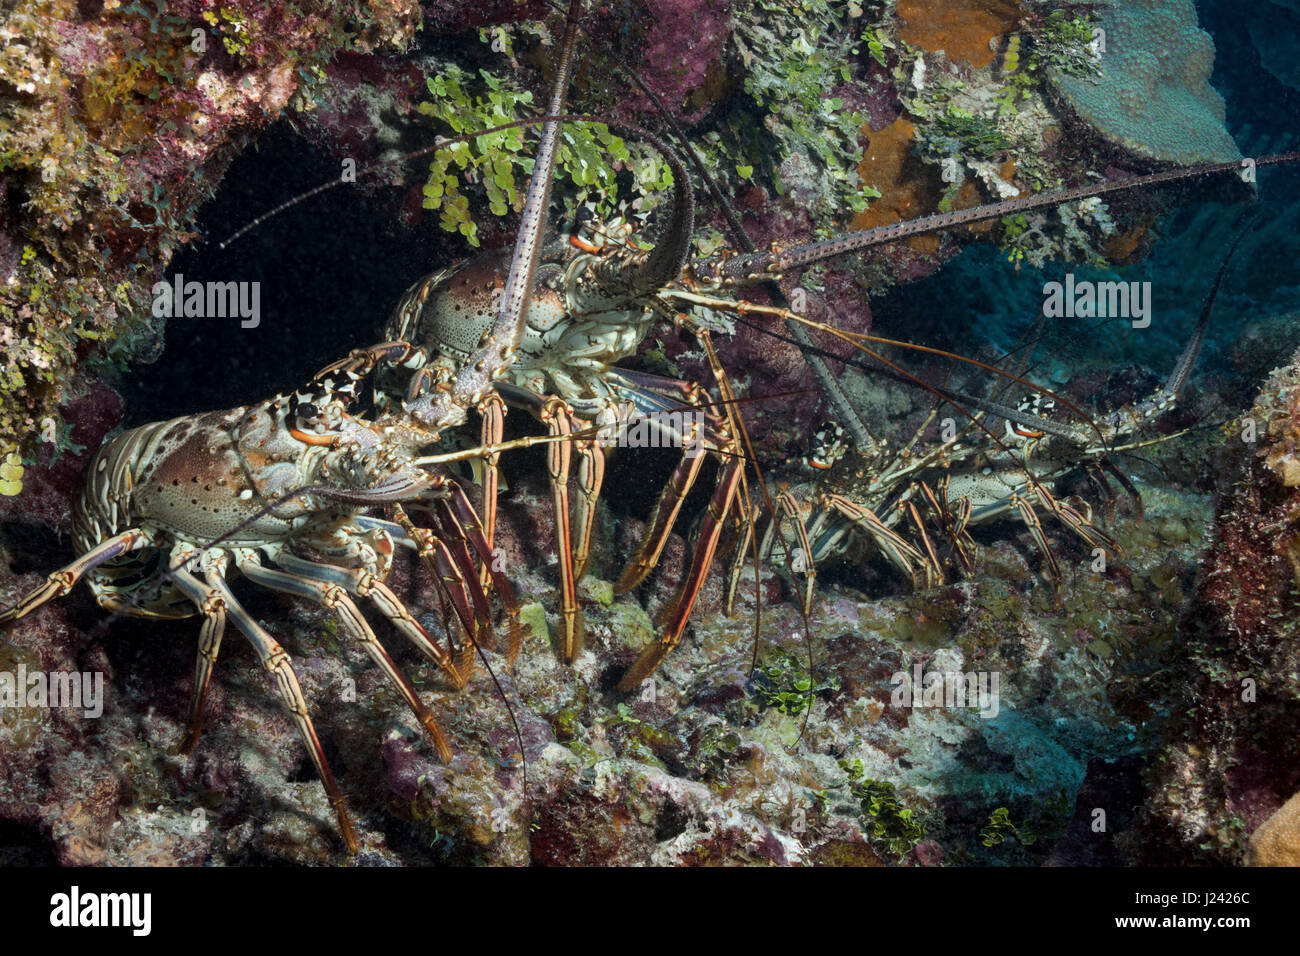 A quartet of spiny lobsters. Stock Photo